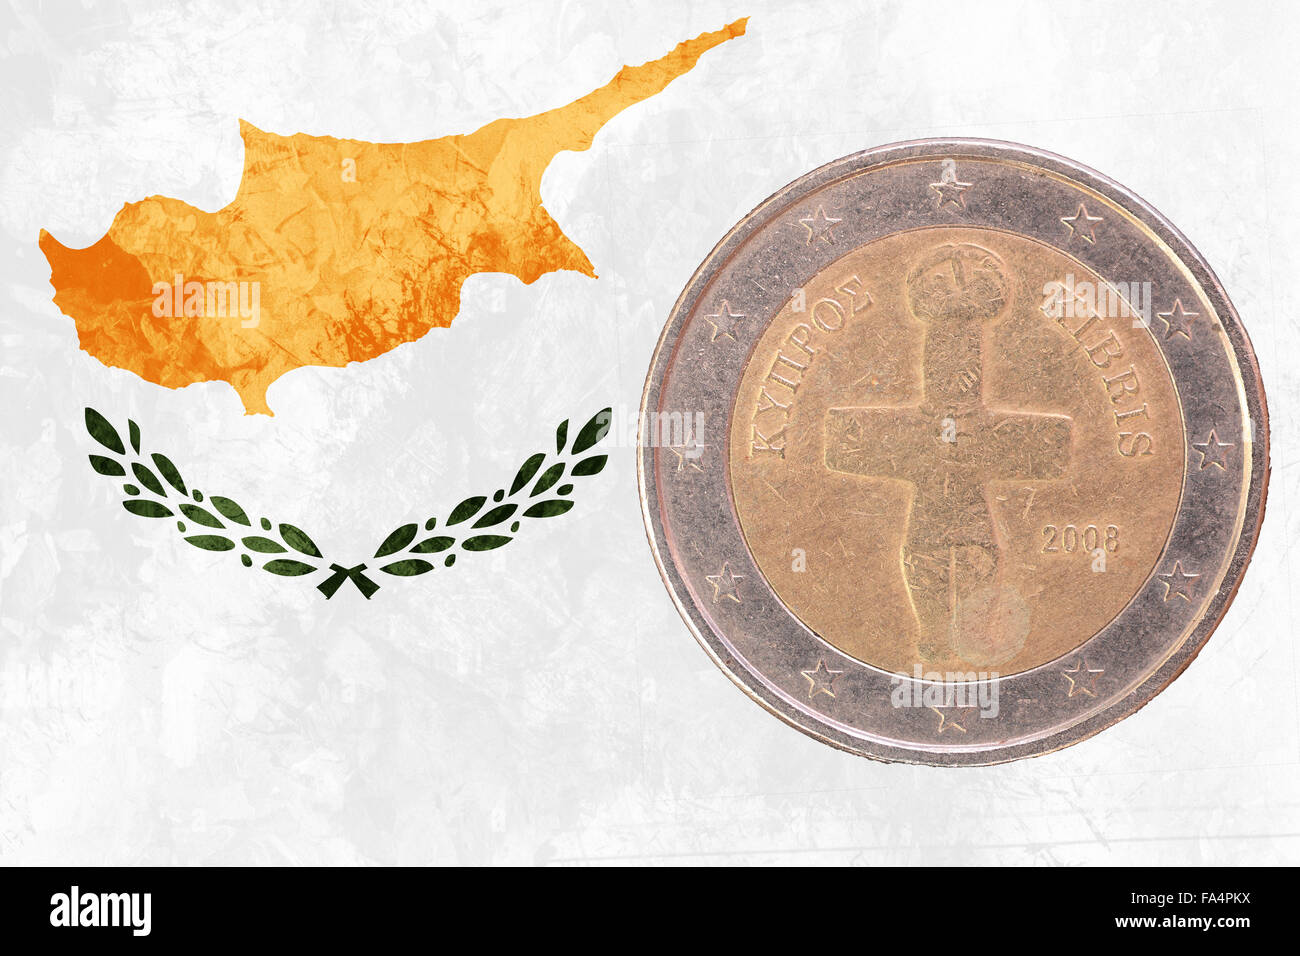 Two euros coin from Cyprus isolated on the national cypriot flag as background Stock Photo